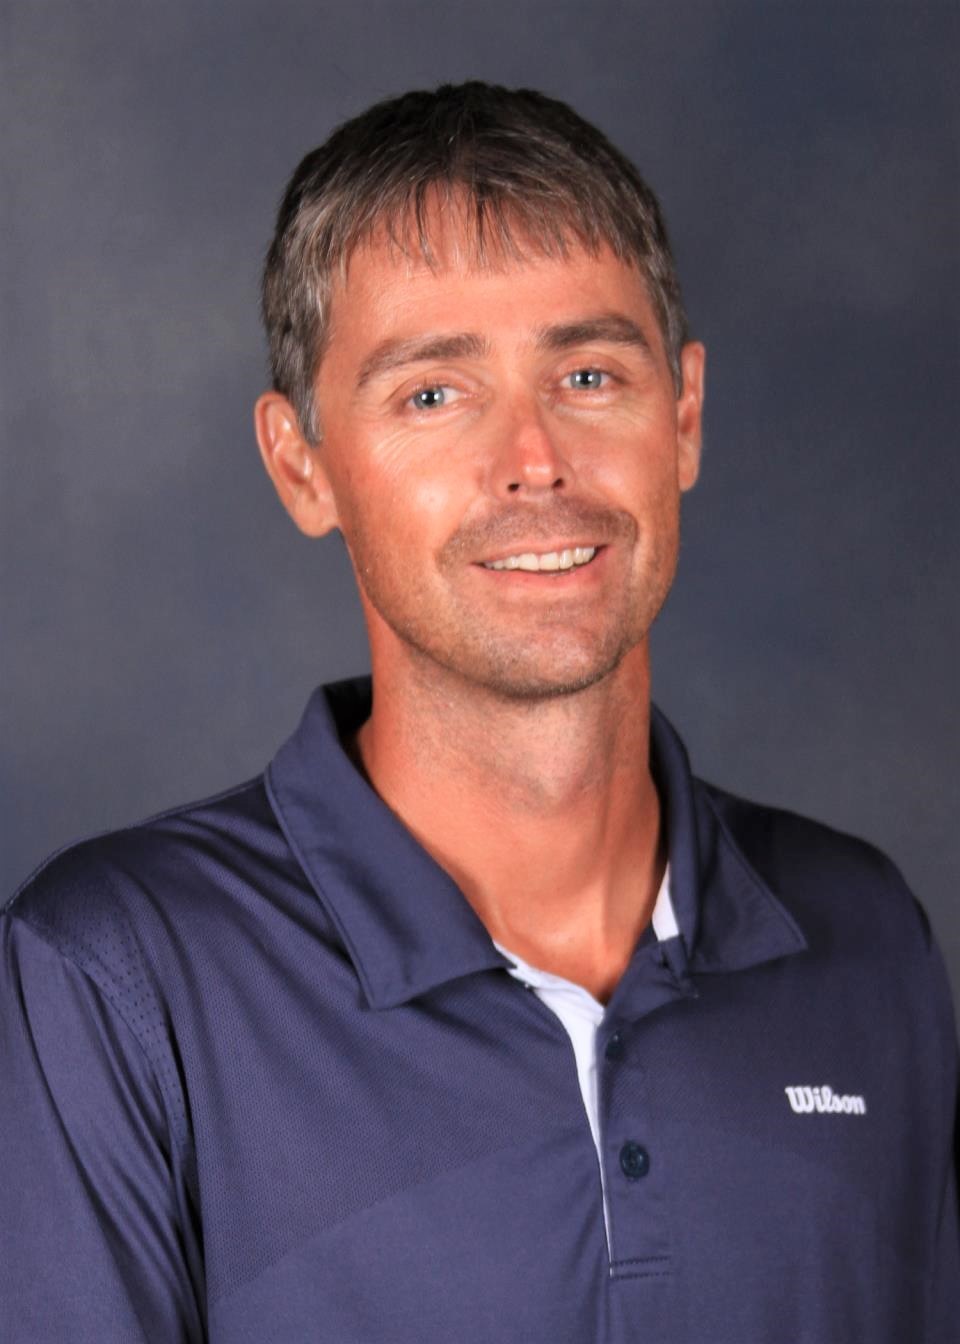 Fairhope's Catar named USTA Southern Tennis Professional of the Year: ...